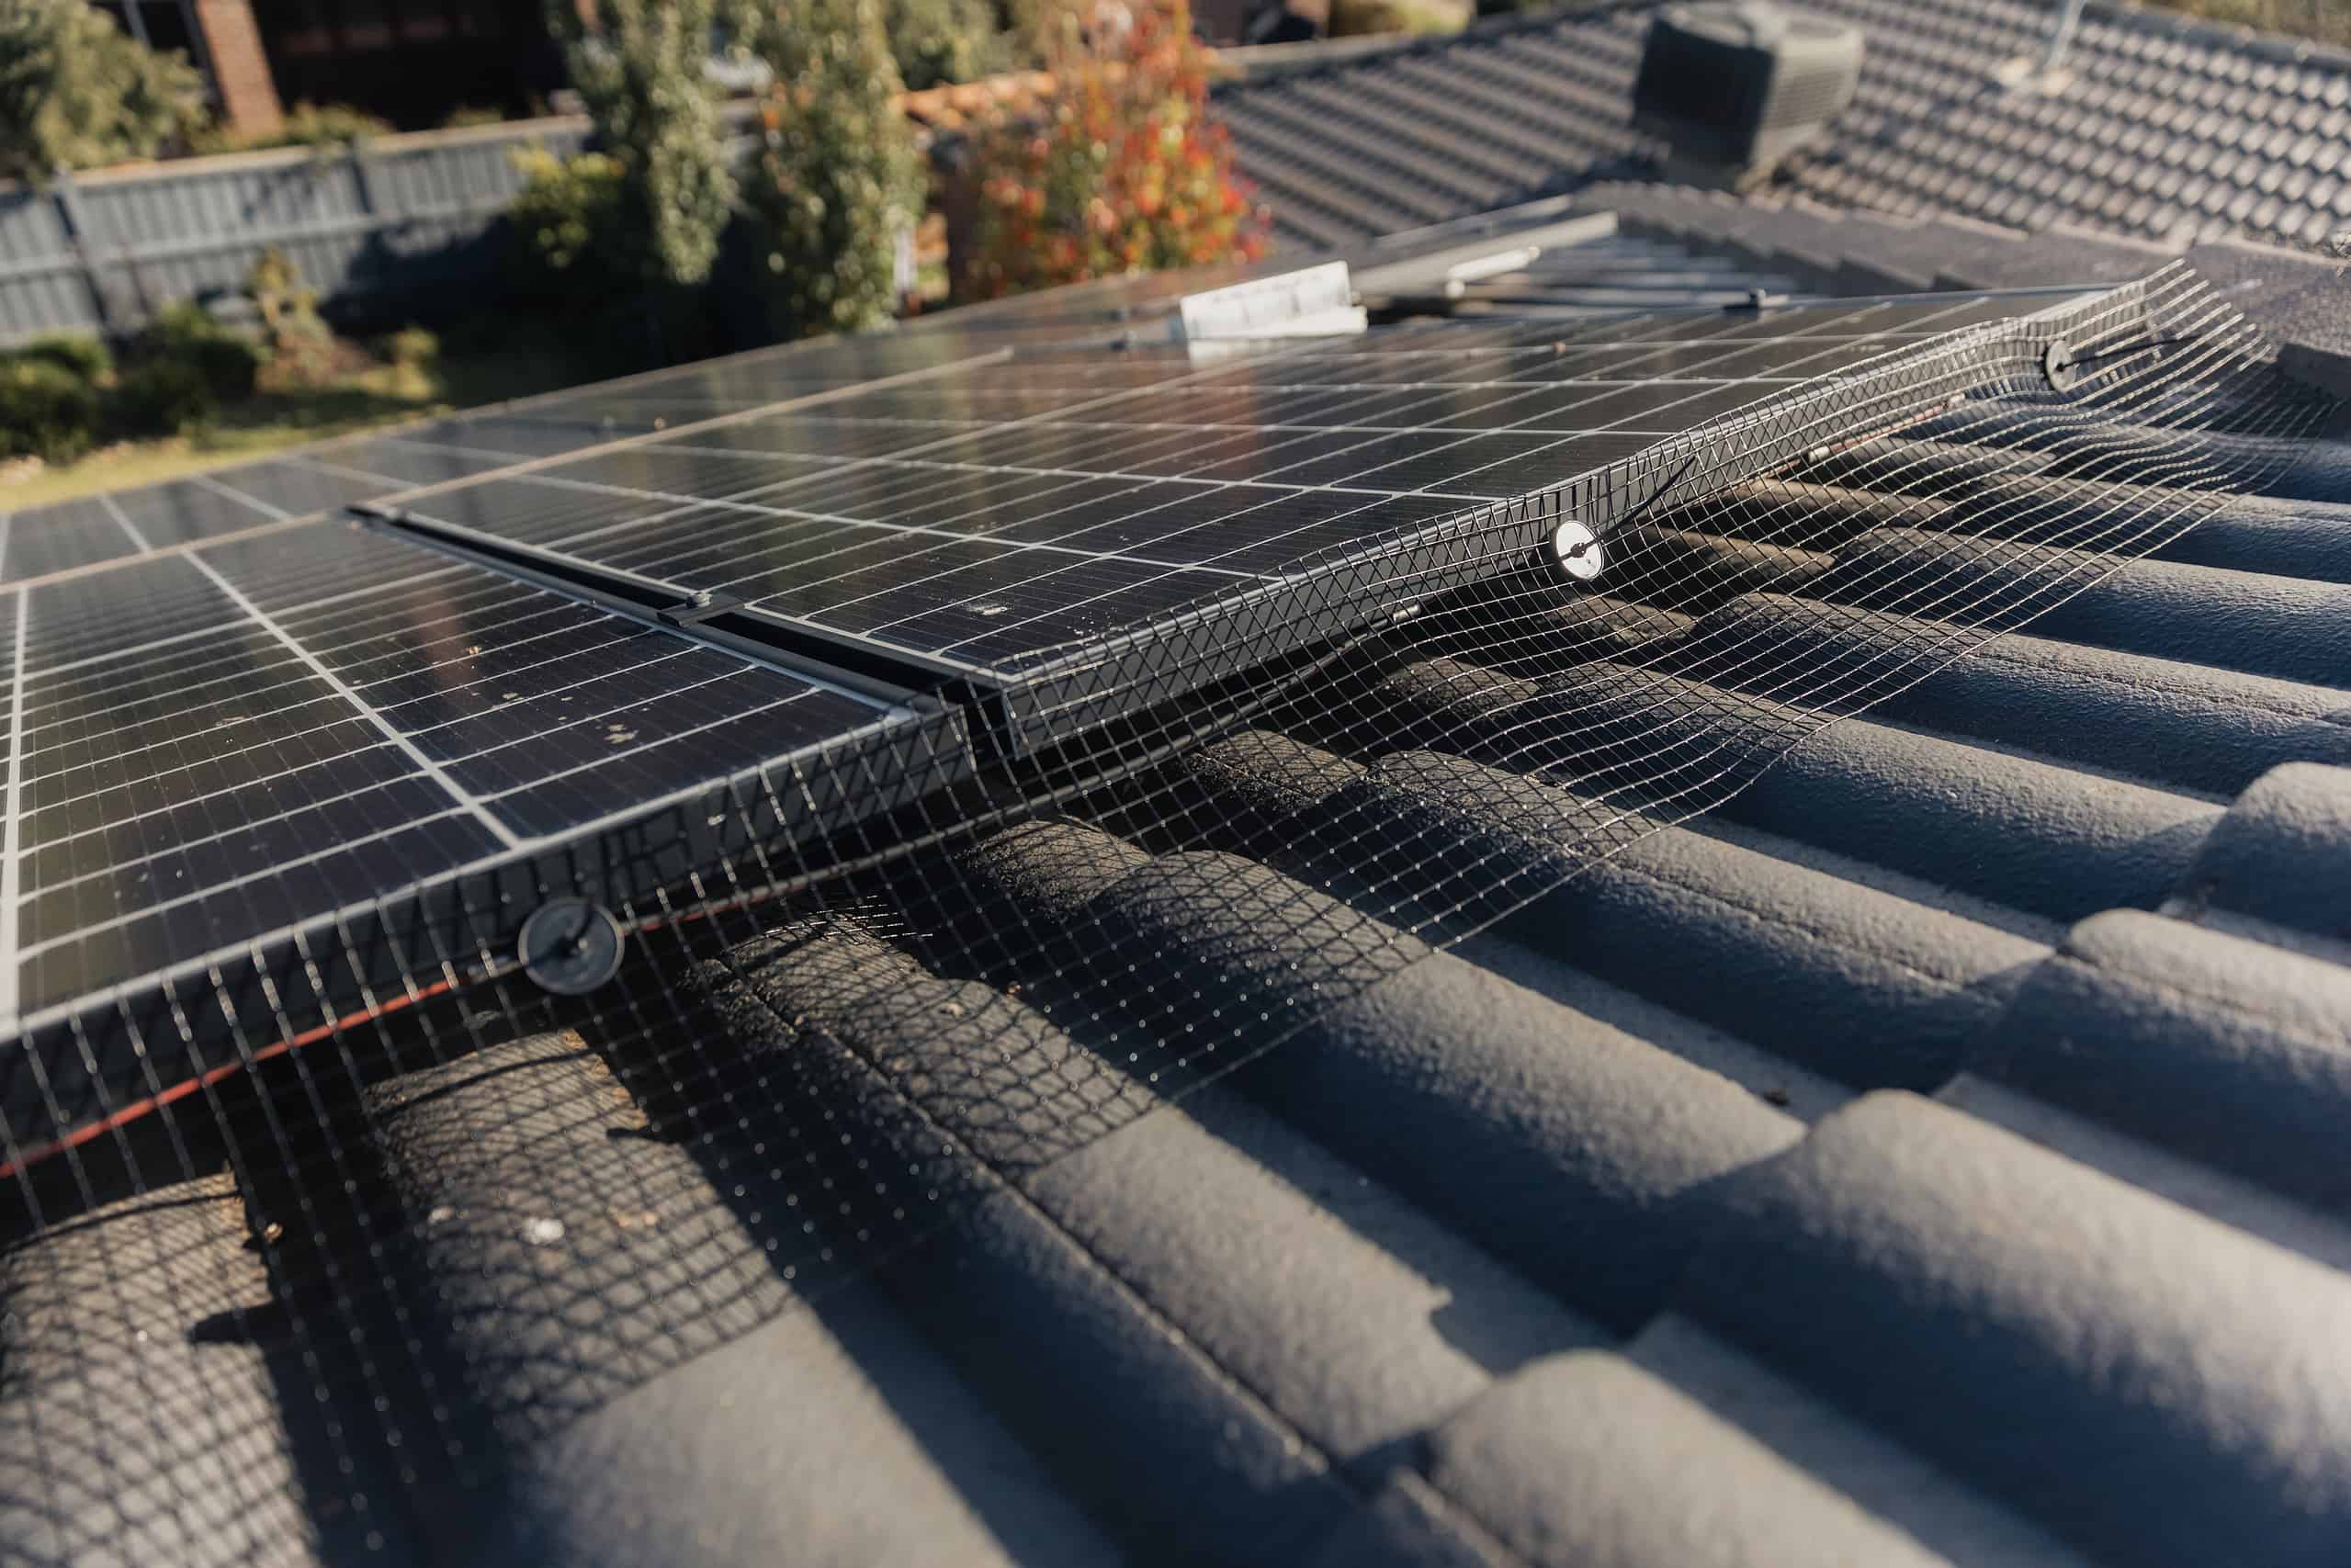 Solar panels on a roof with surrounding solar mesh gutter guards, preventing birds from nesting underneath while ensuring solar efficiency